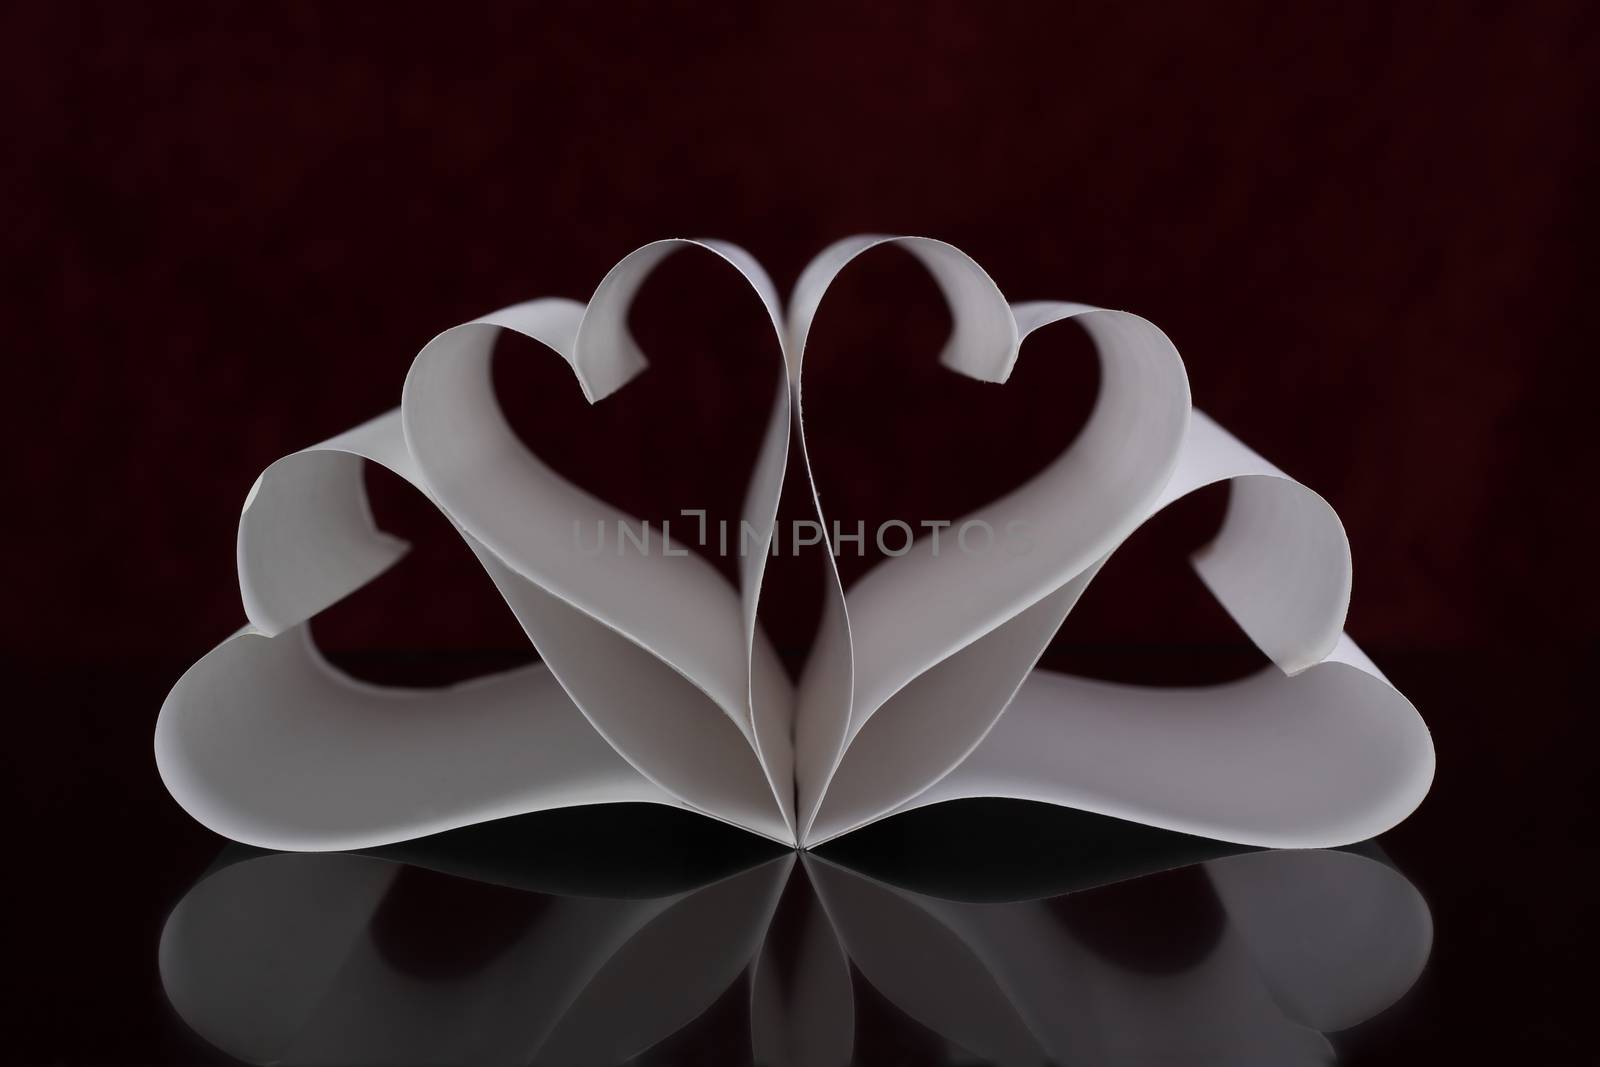 four paper hearts front view with red background and reflection on black table